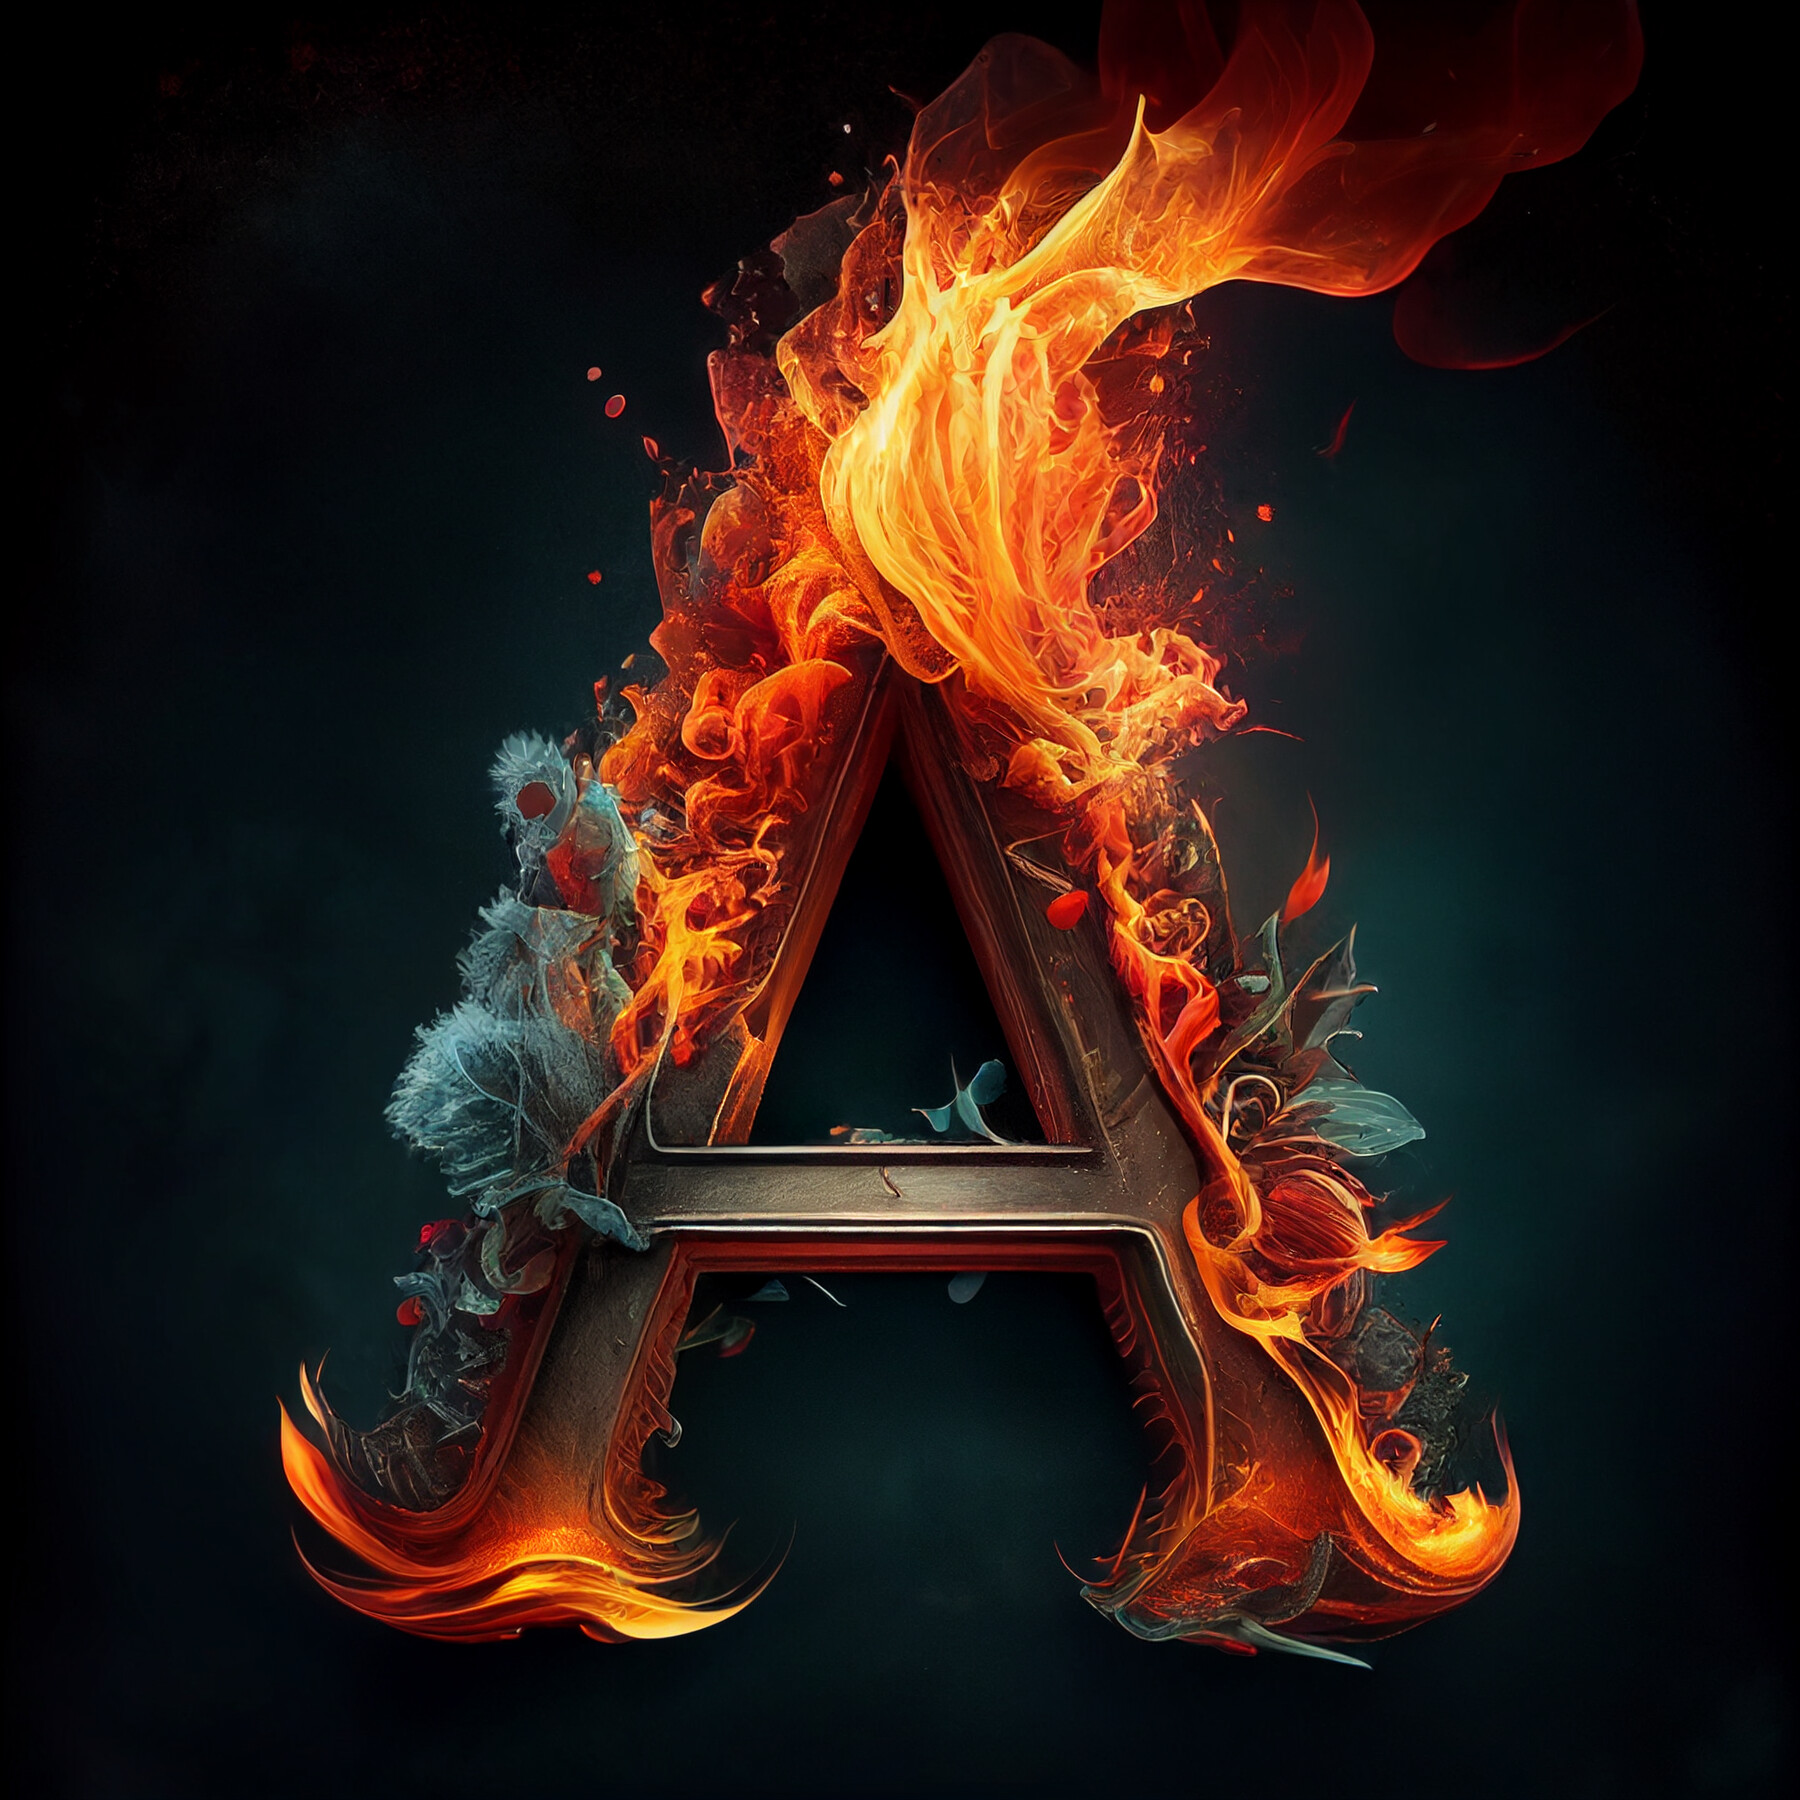 ArtStation - Letter A with Fire Flames | Artworks